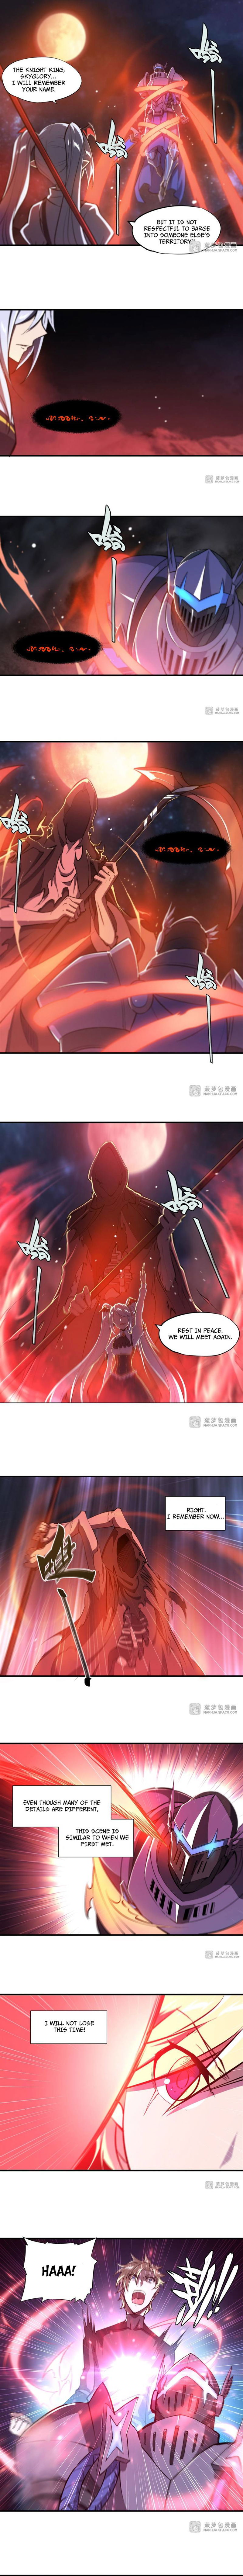 The Blood Princess and the Knight Chapter 208 page 5